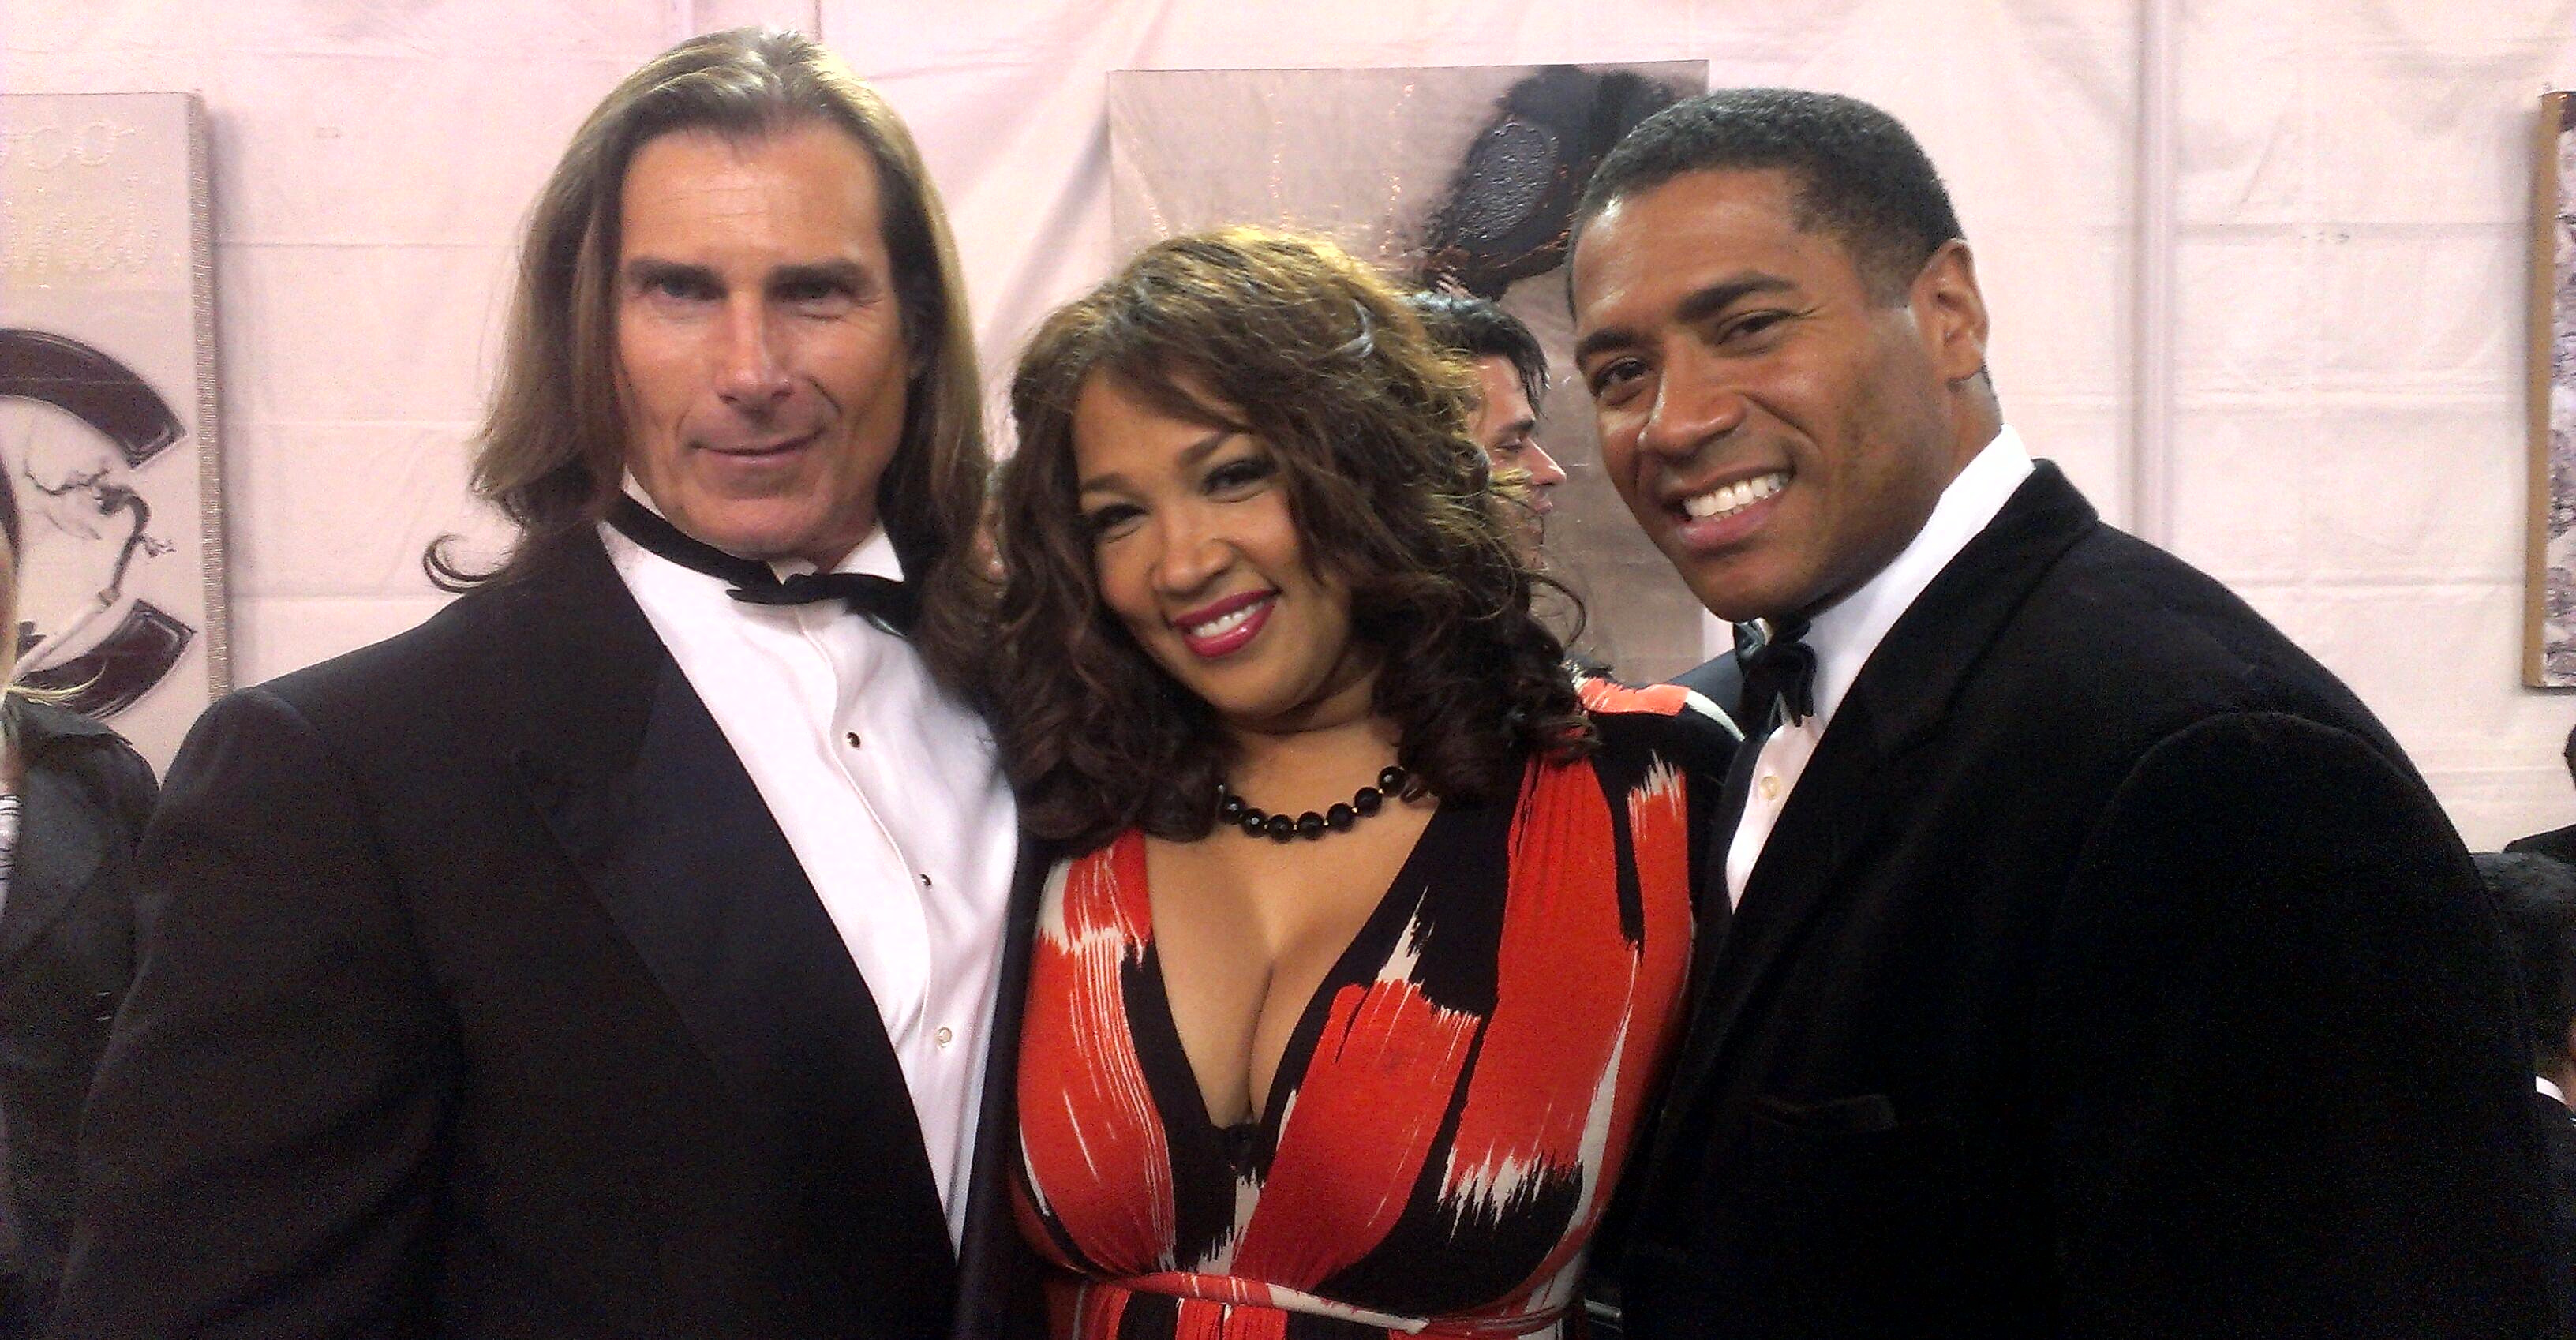 Fabio, Kym Whitley and Mandell Frazier at event of the 